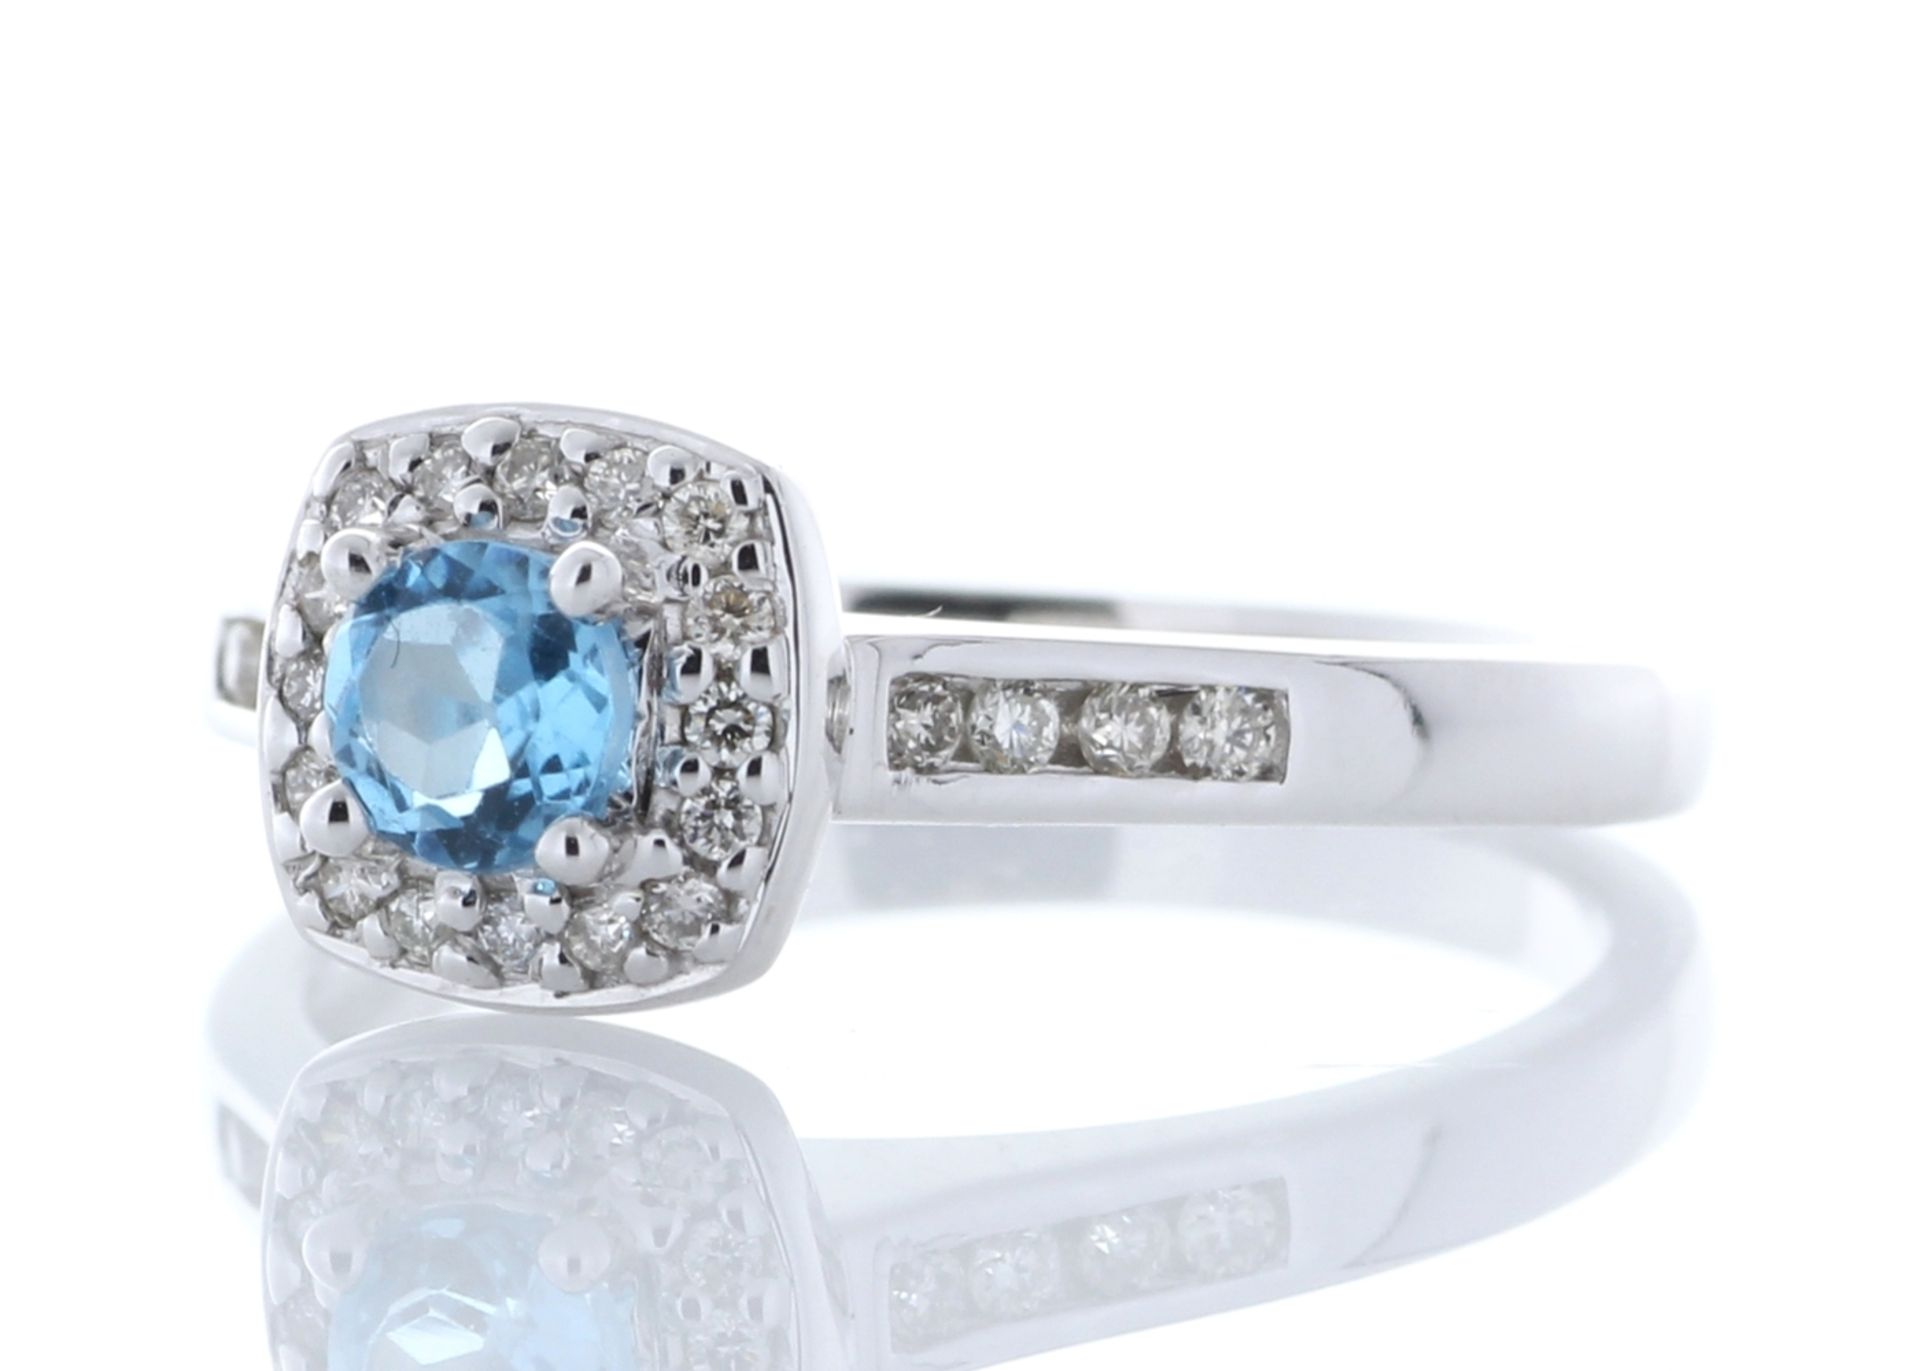 9ct White Gold Blue Topaz Diamond Ring 0.22 Carats - Valued by GIE £2,850.00 - This gorgeous ring - Image 2 of 5